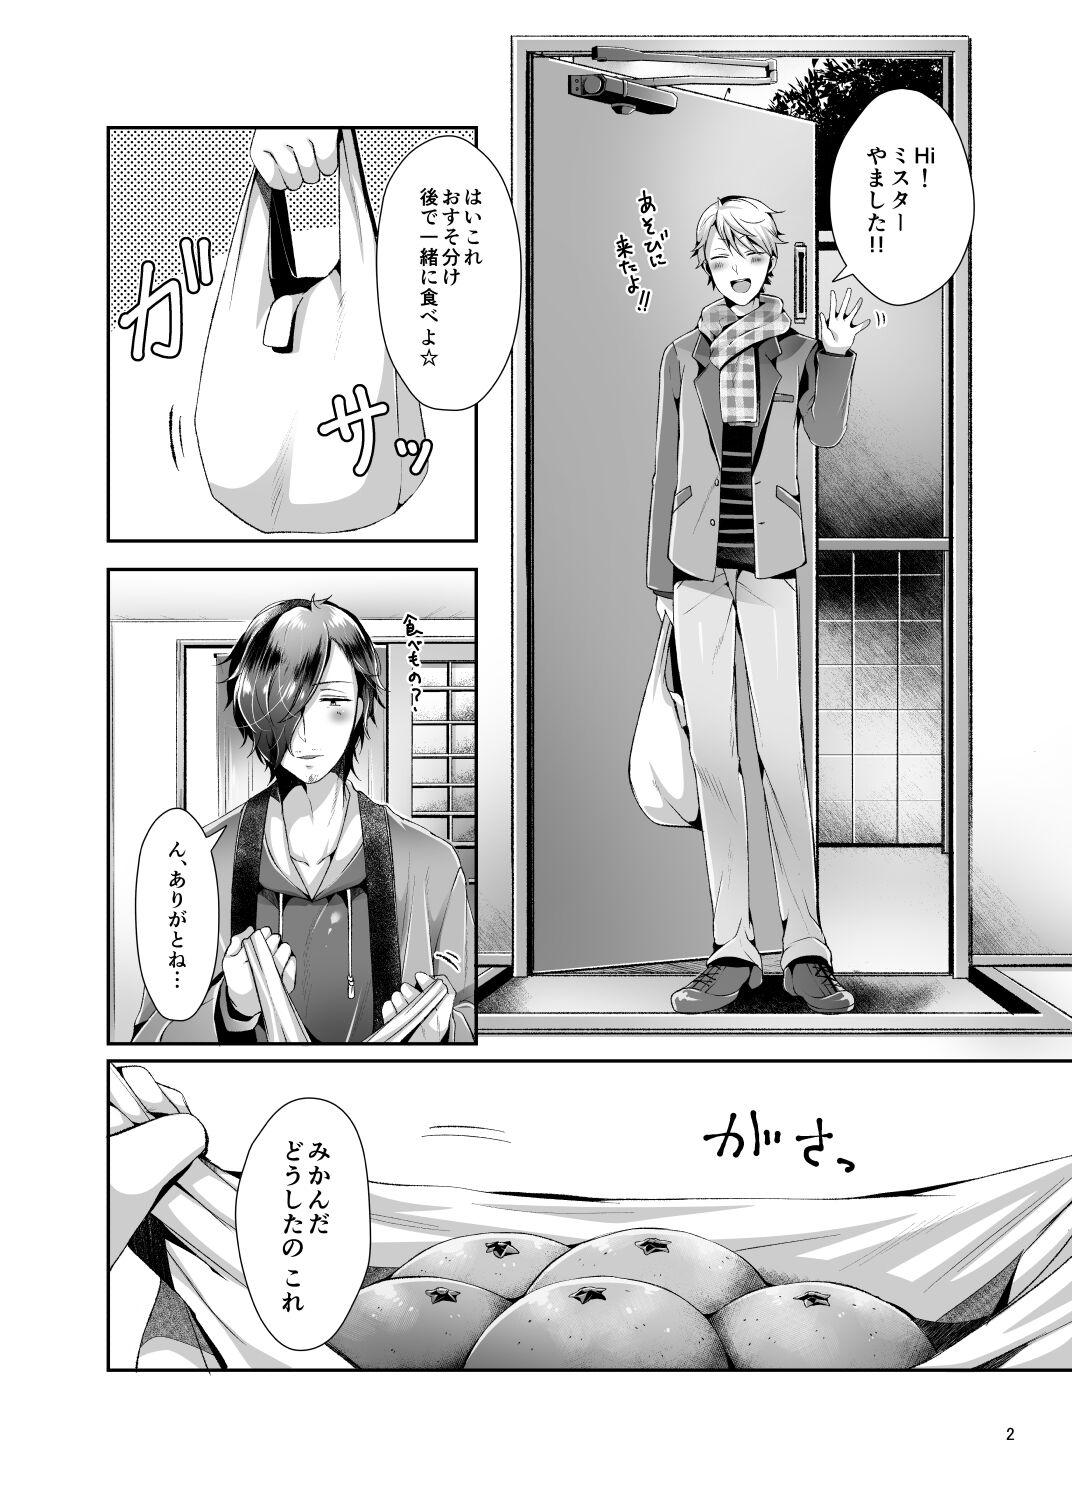 Casa Relax at home - The idolmaster sidem 8teen - Page 3